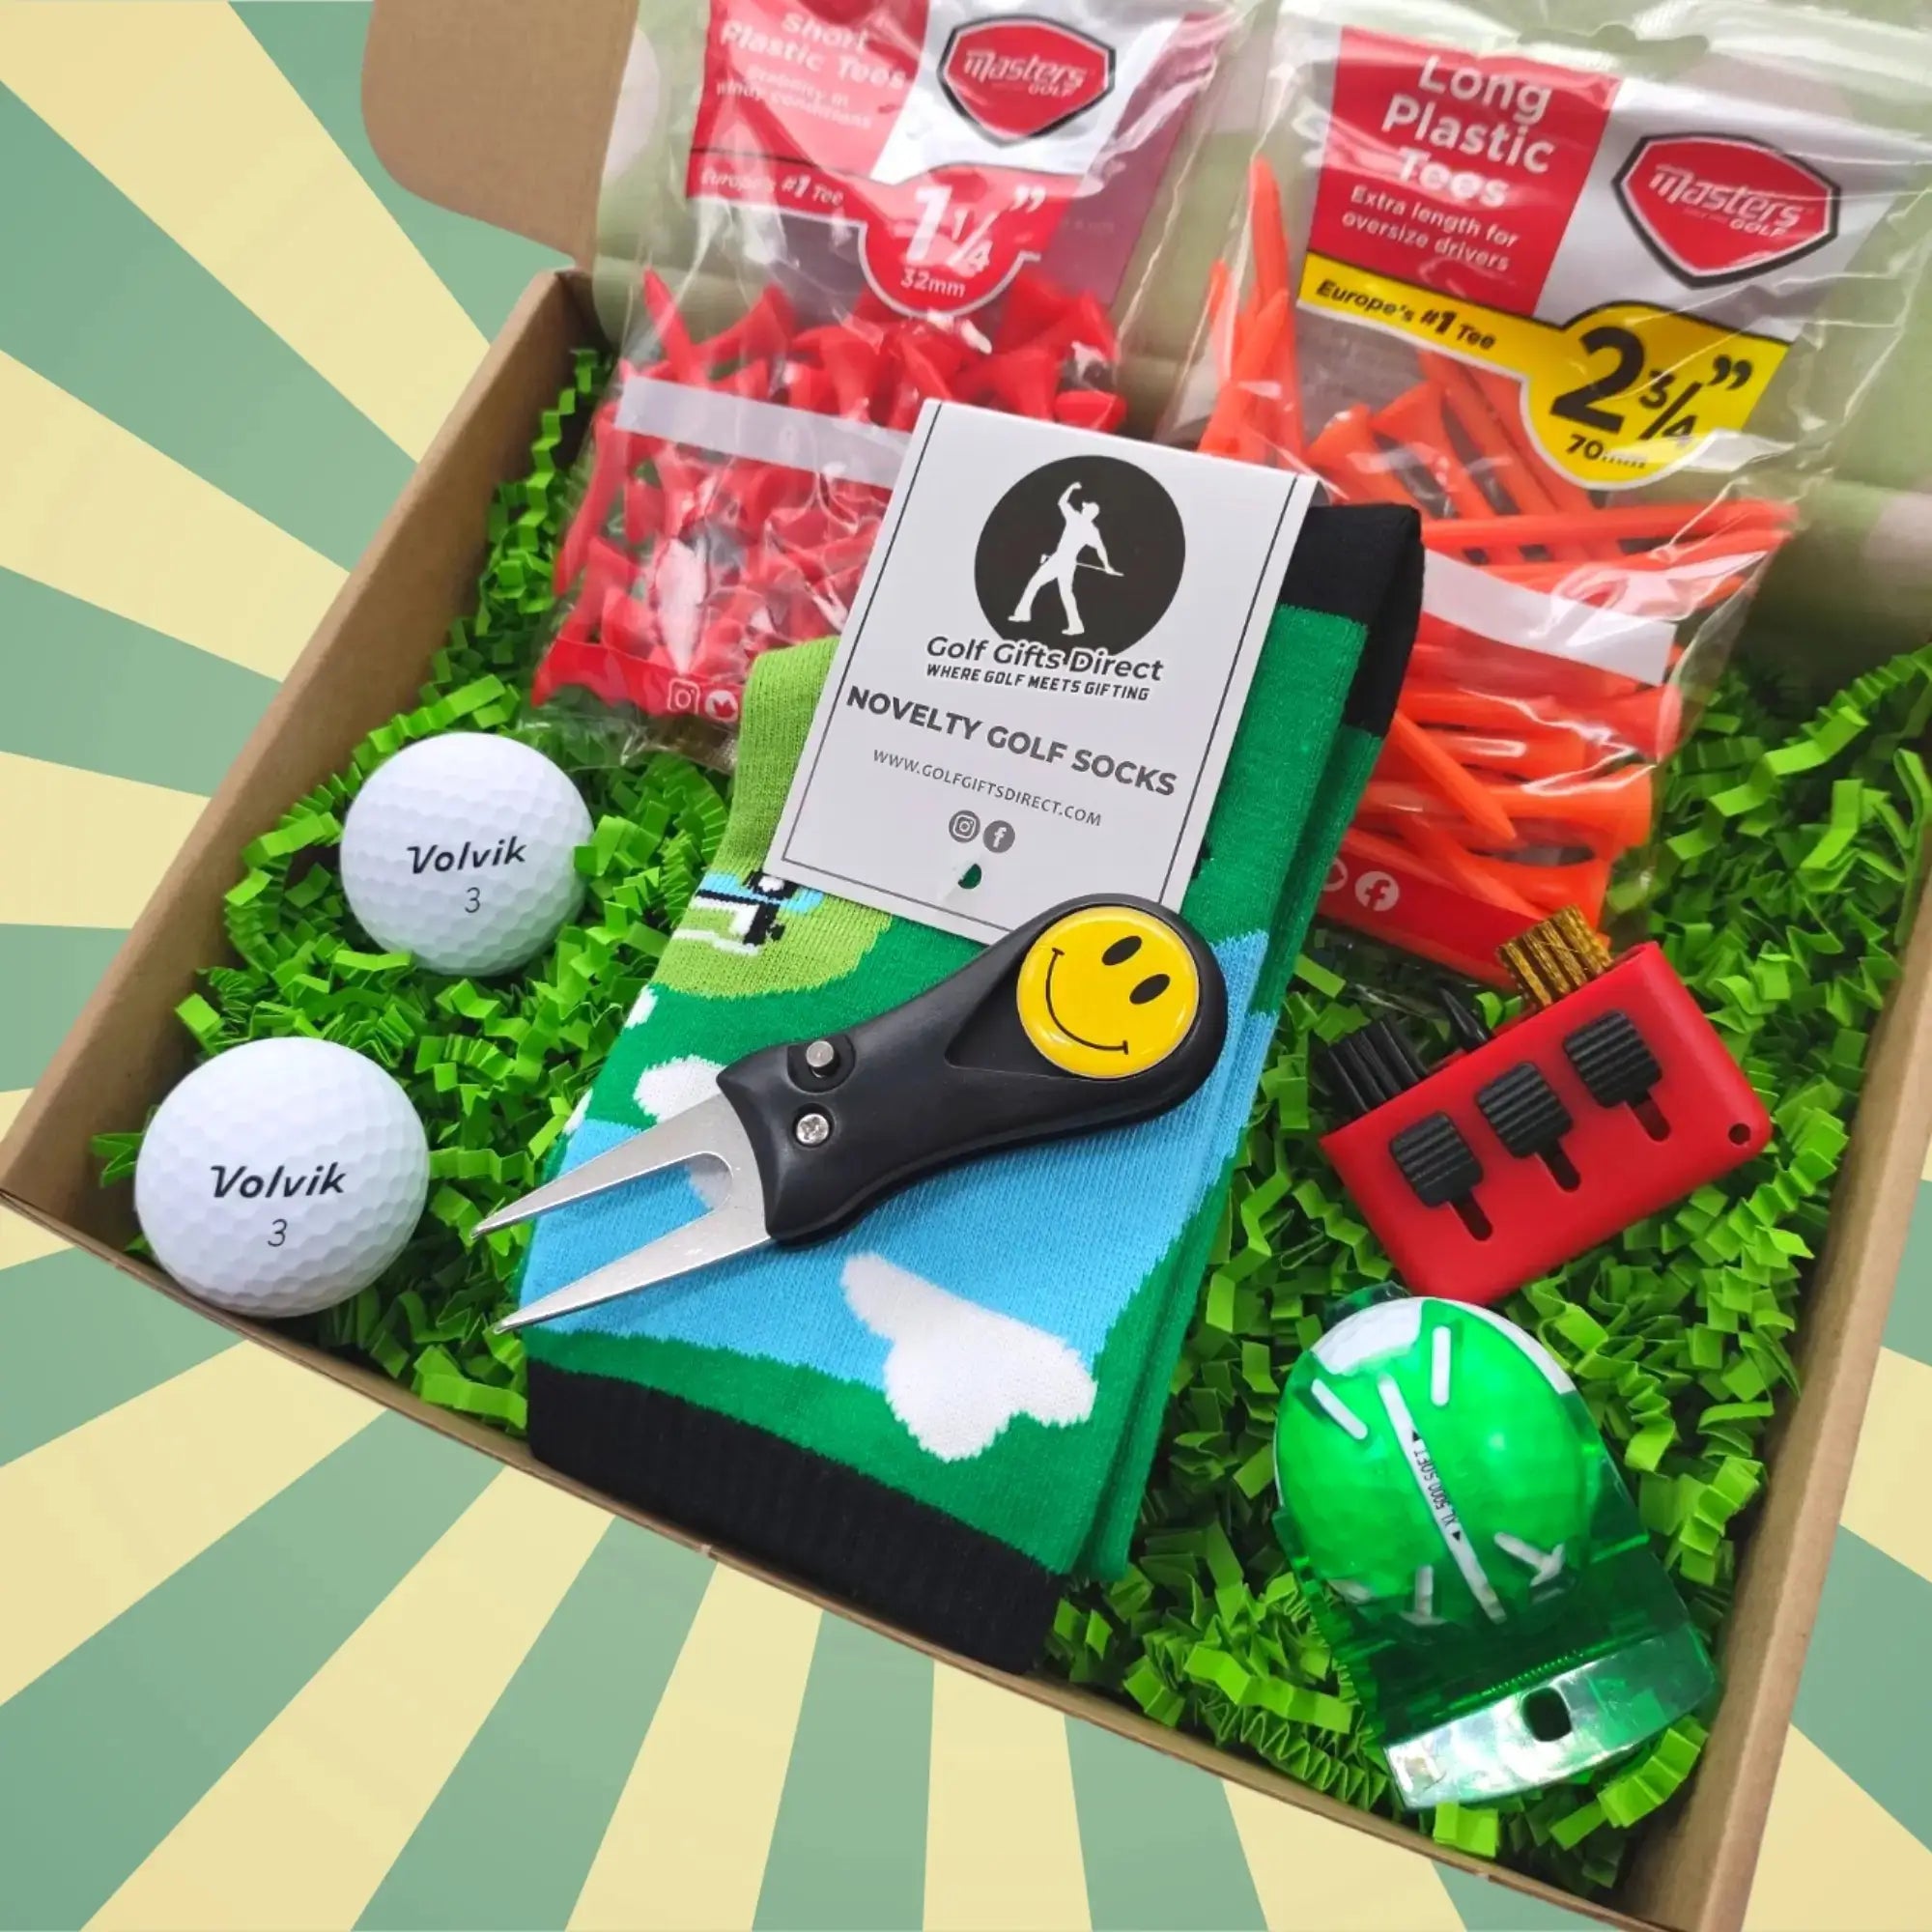 Golf Gifts For Men - The All Rounder Gift Box - The Perfect Choice